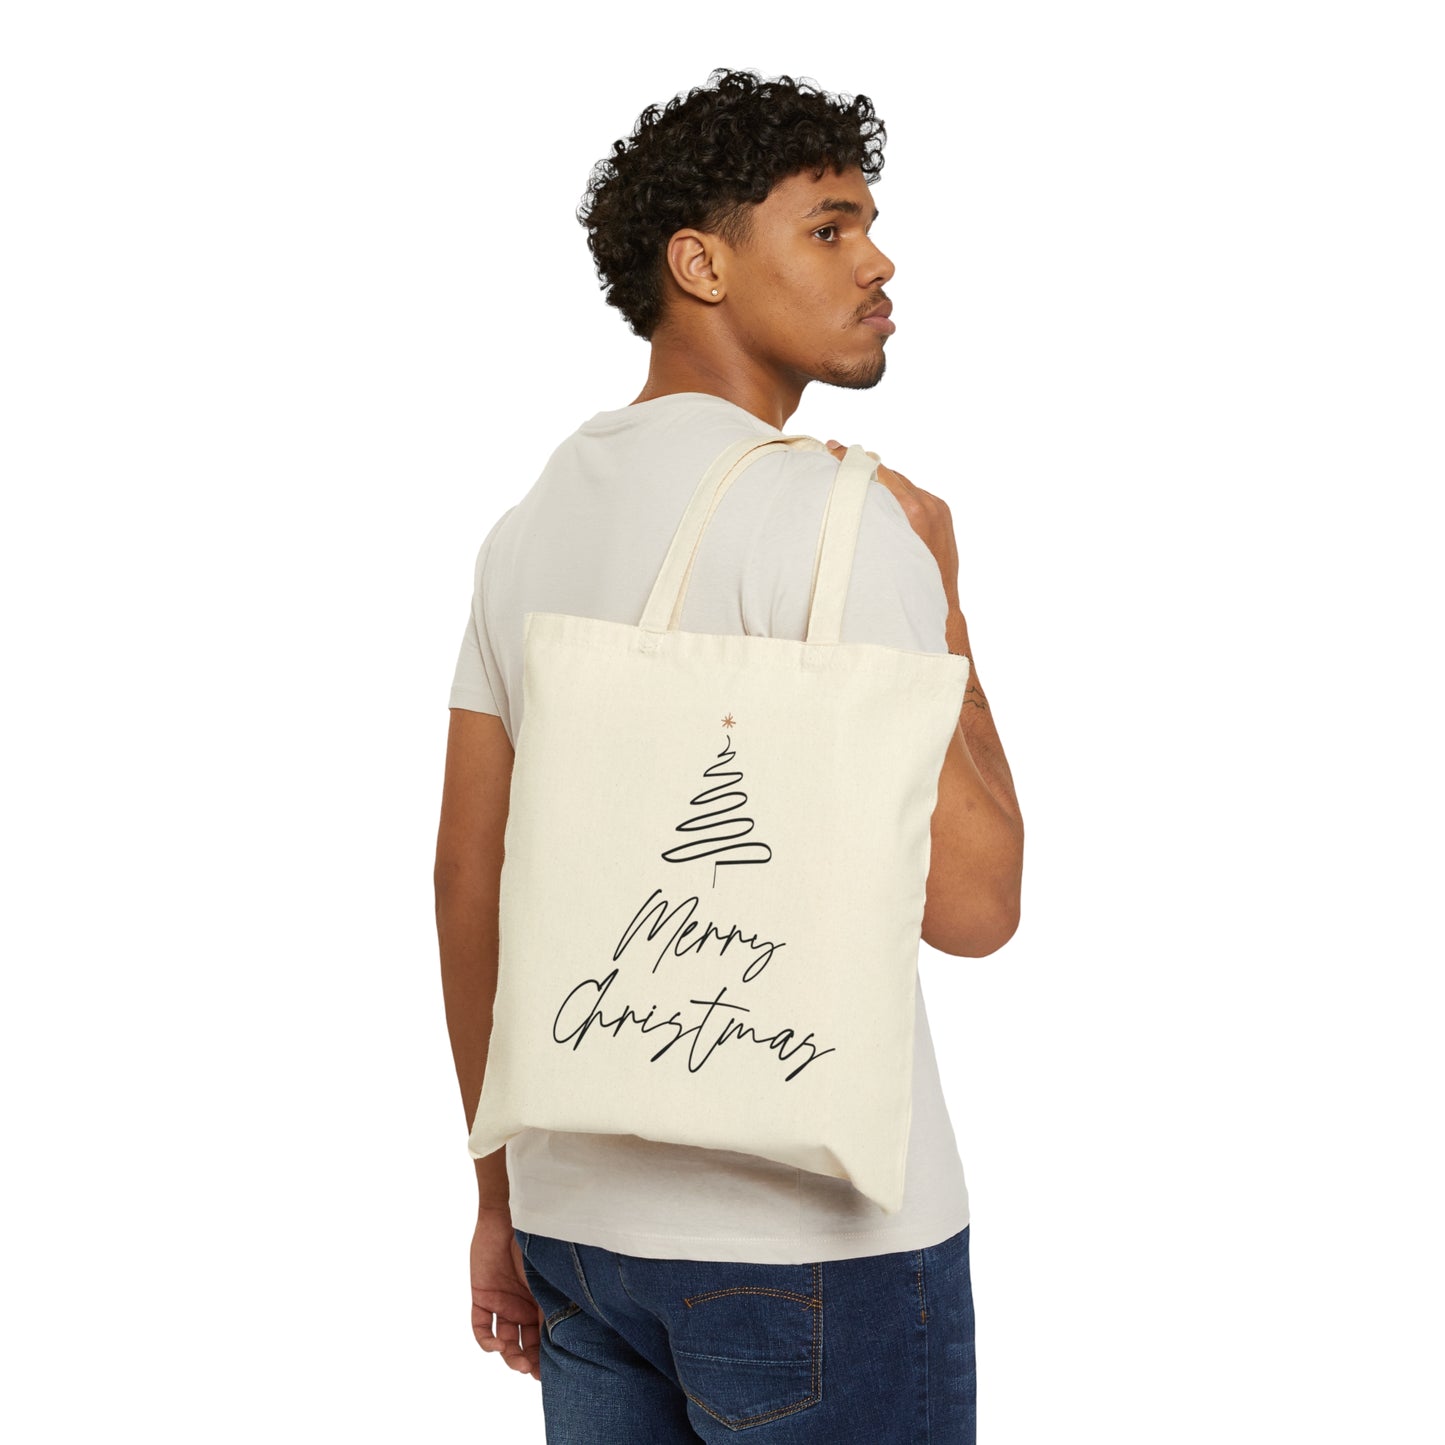 Merry Christmas Gift New Year Slogan Art Canvas Shopping Cotton Tote Bag